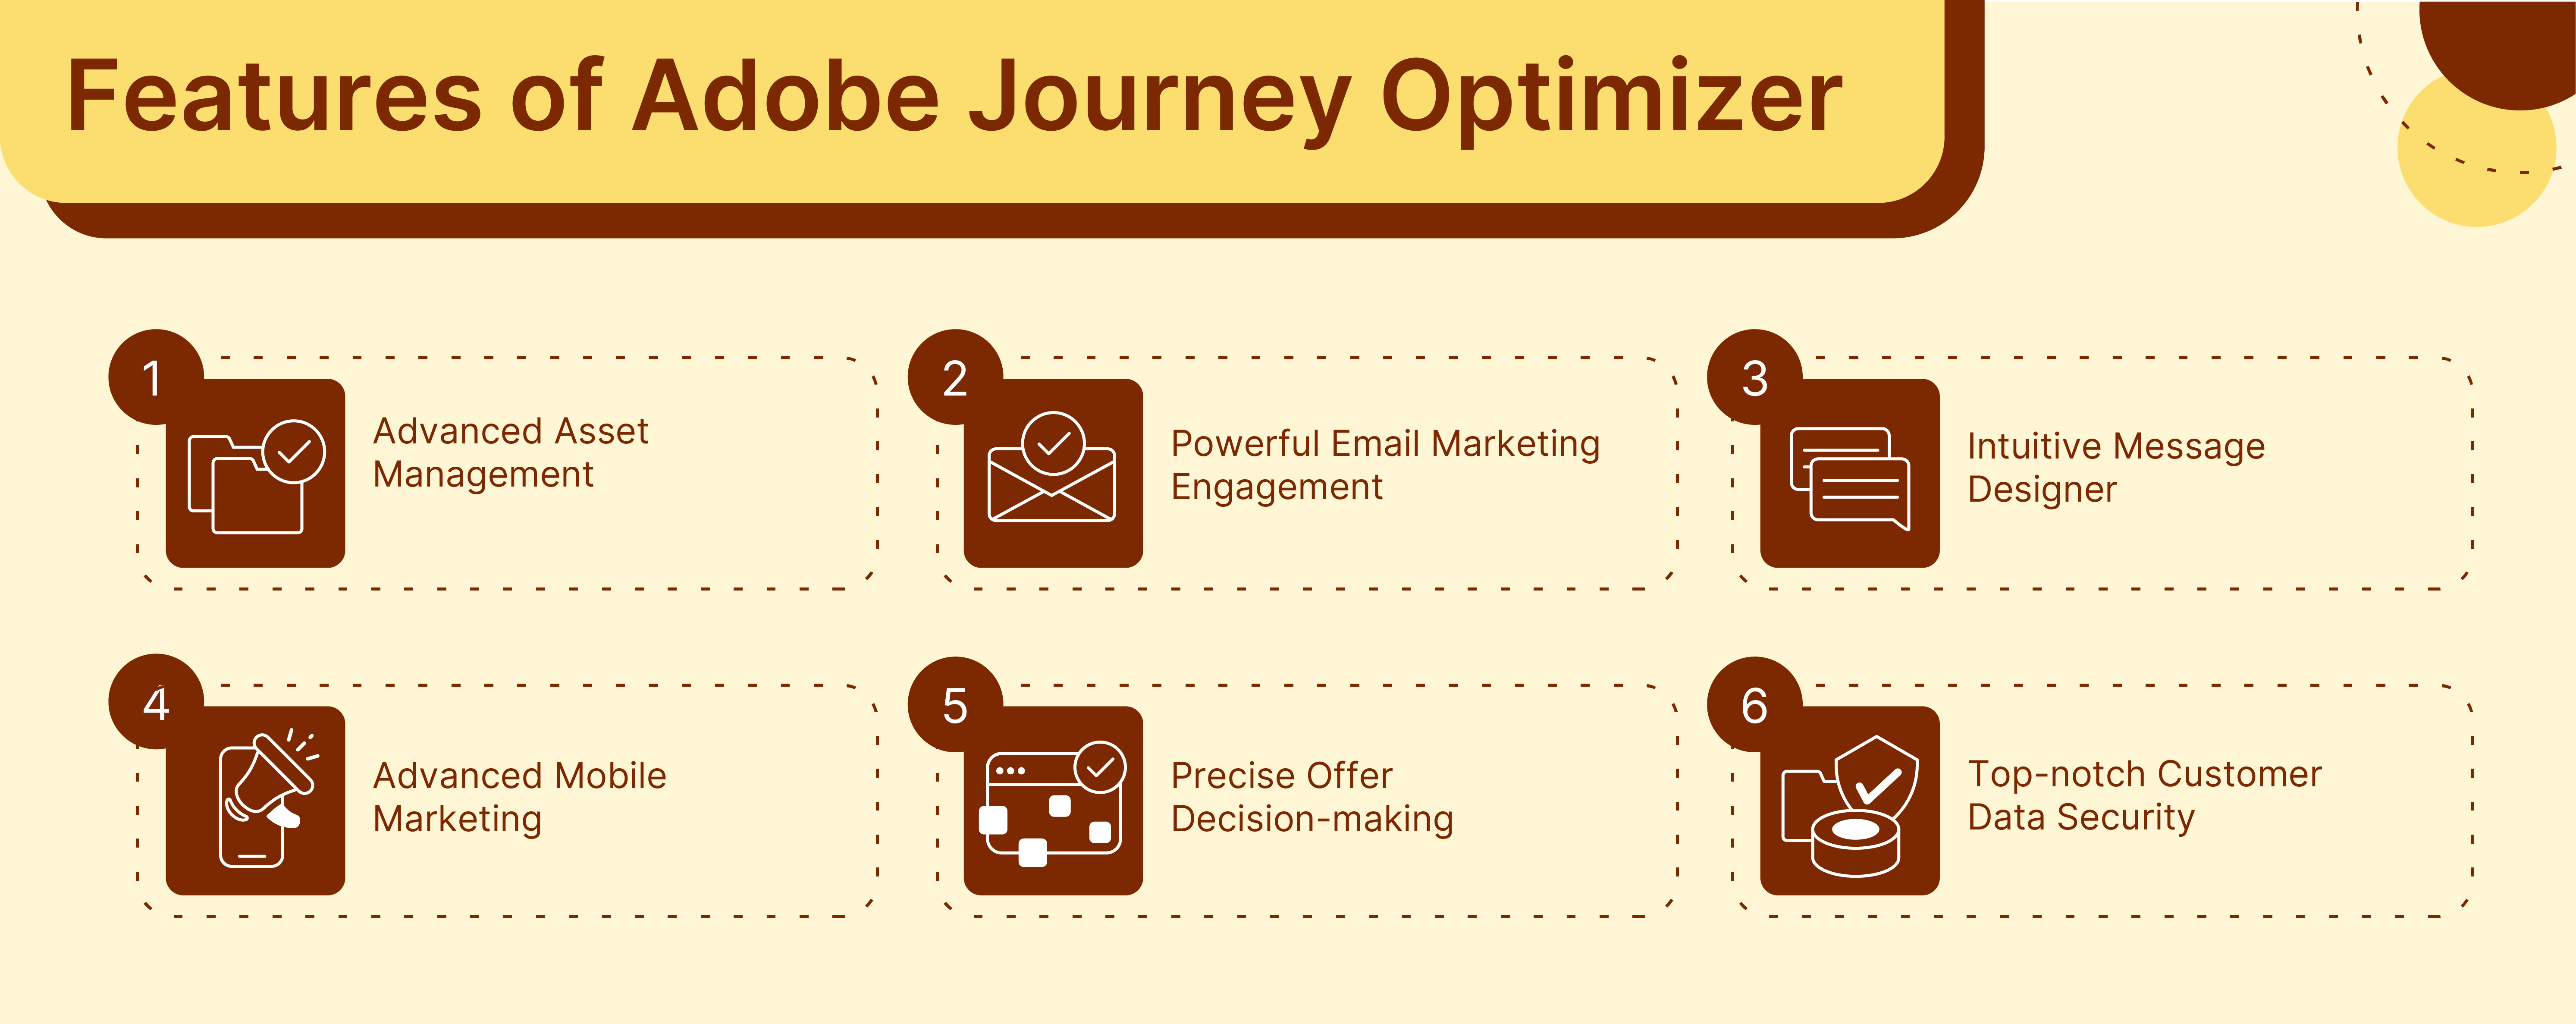 Features of Adobe Journey Optimizer